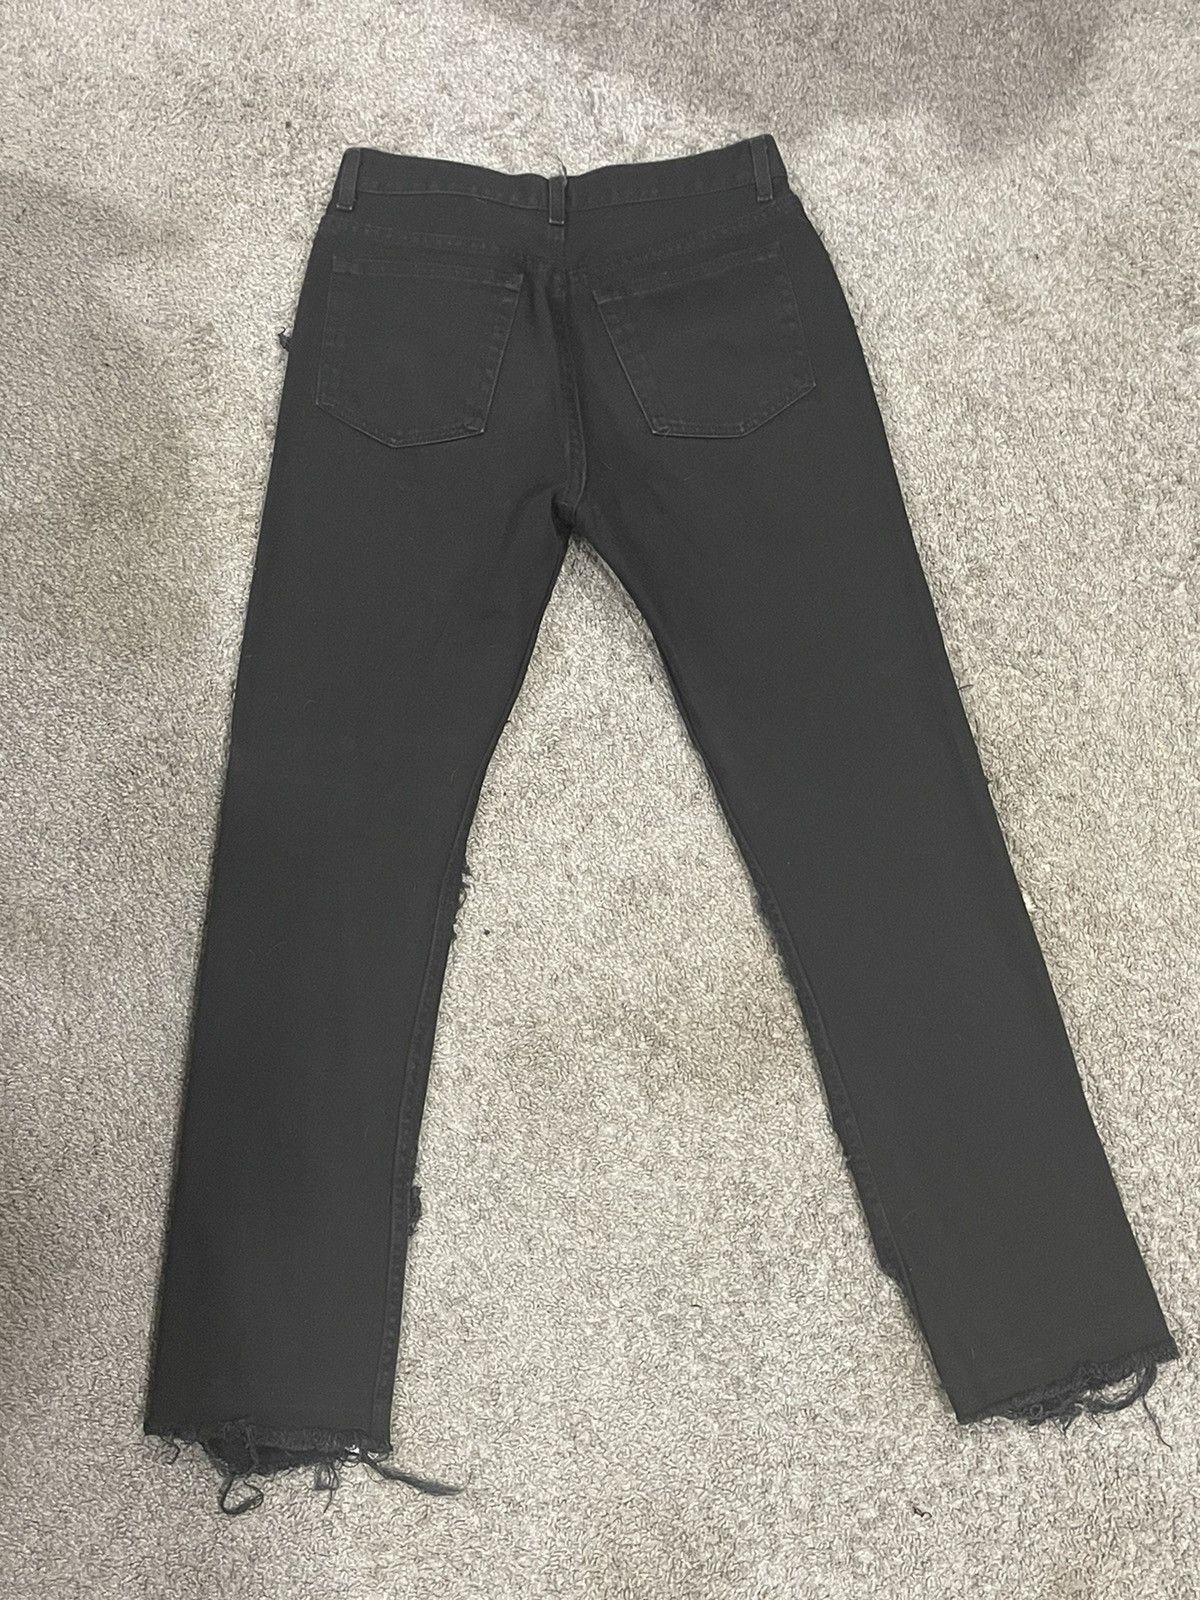 Archival Clothing Distressed Denim Size US 32 / EU 48 - 2 Preview